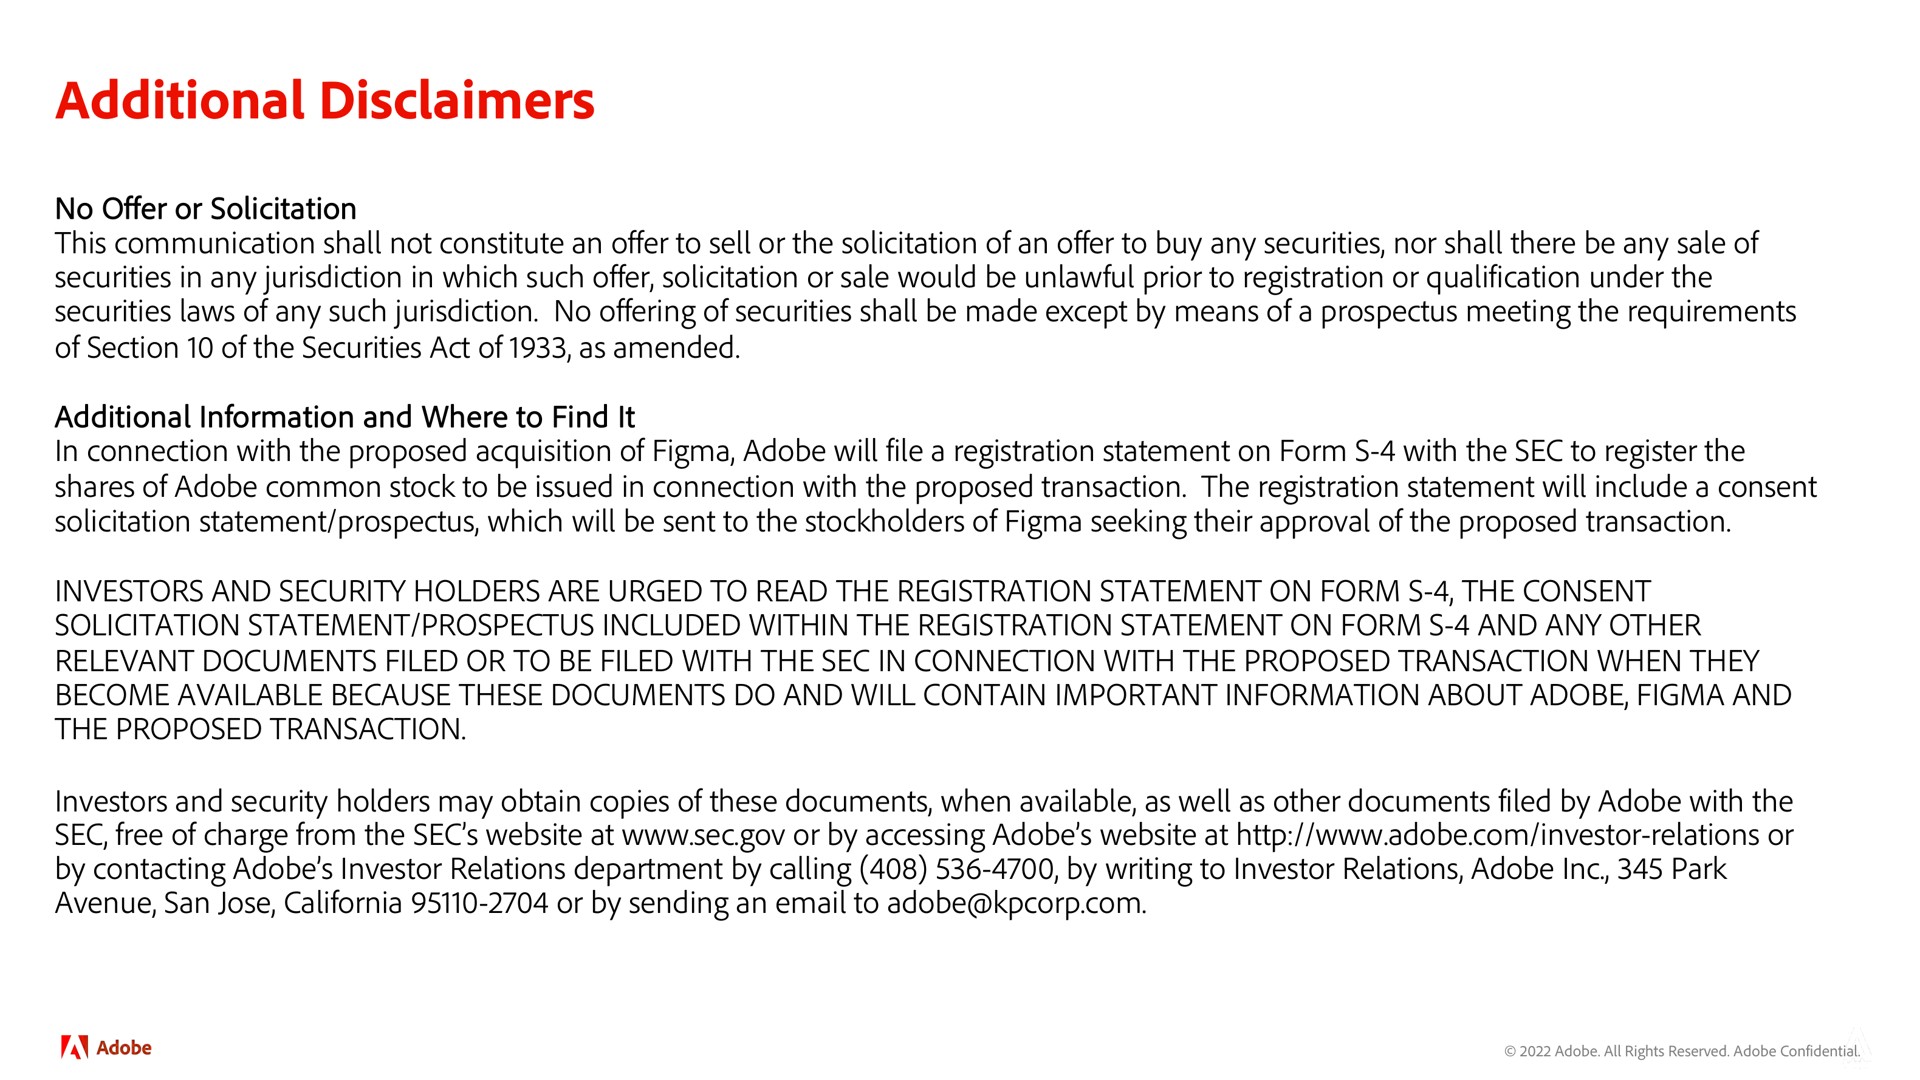 additional disclaimers | Adobe